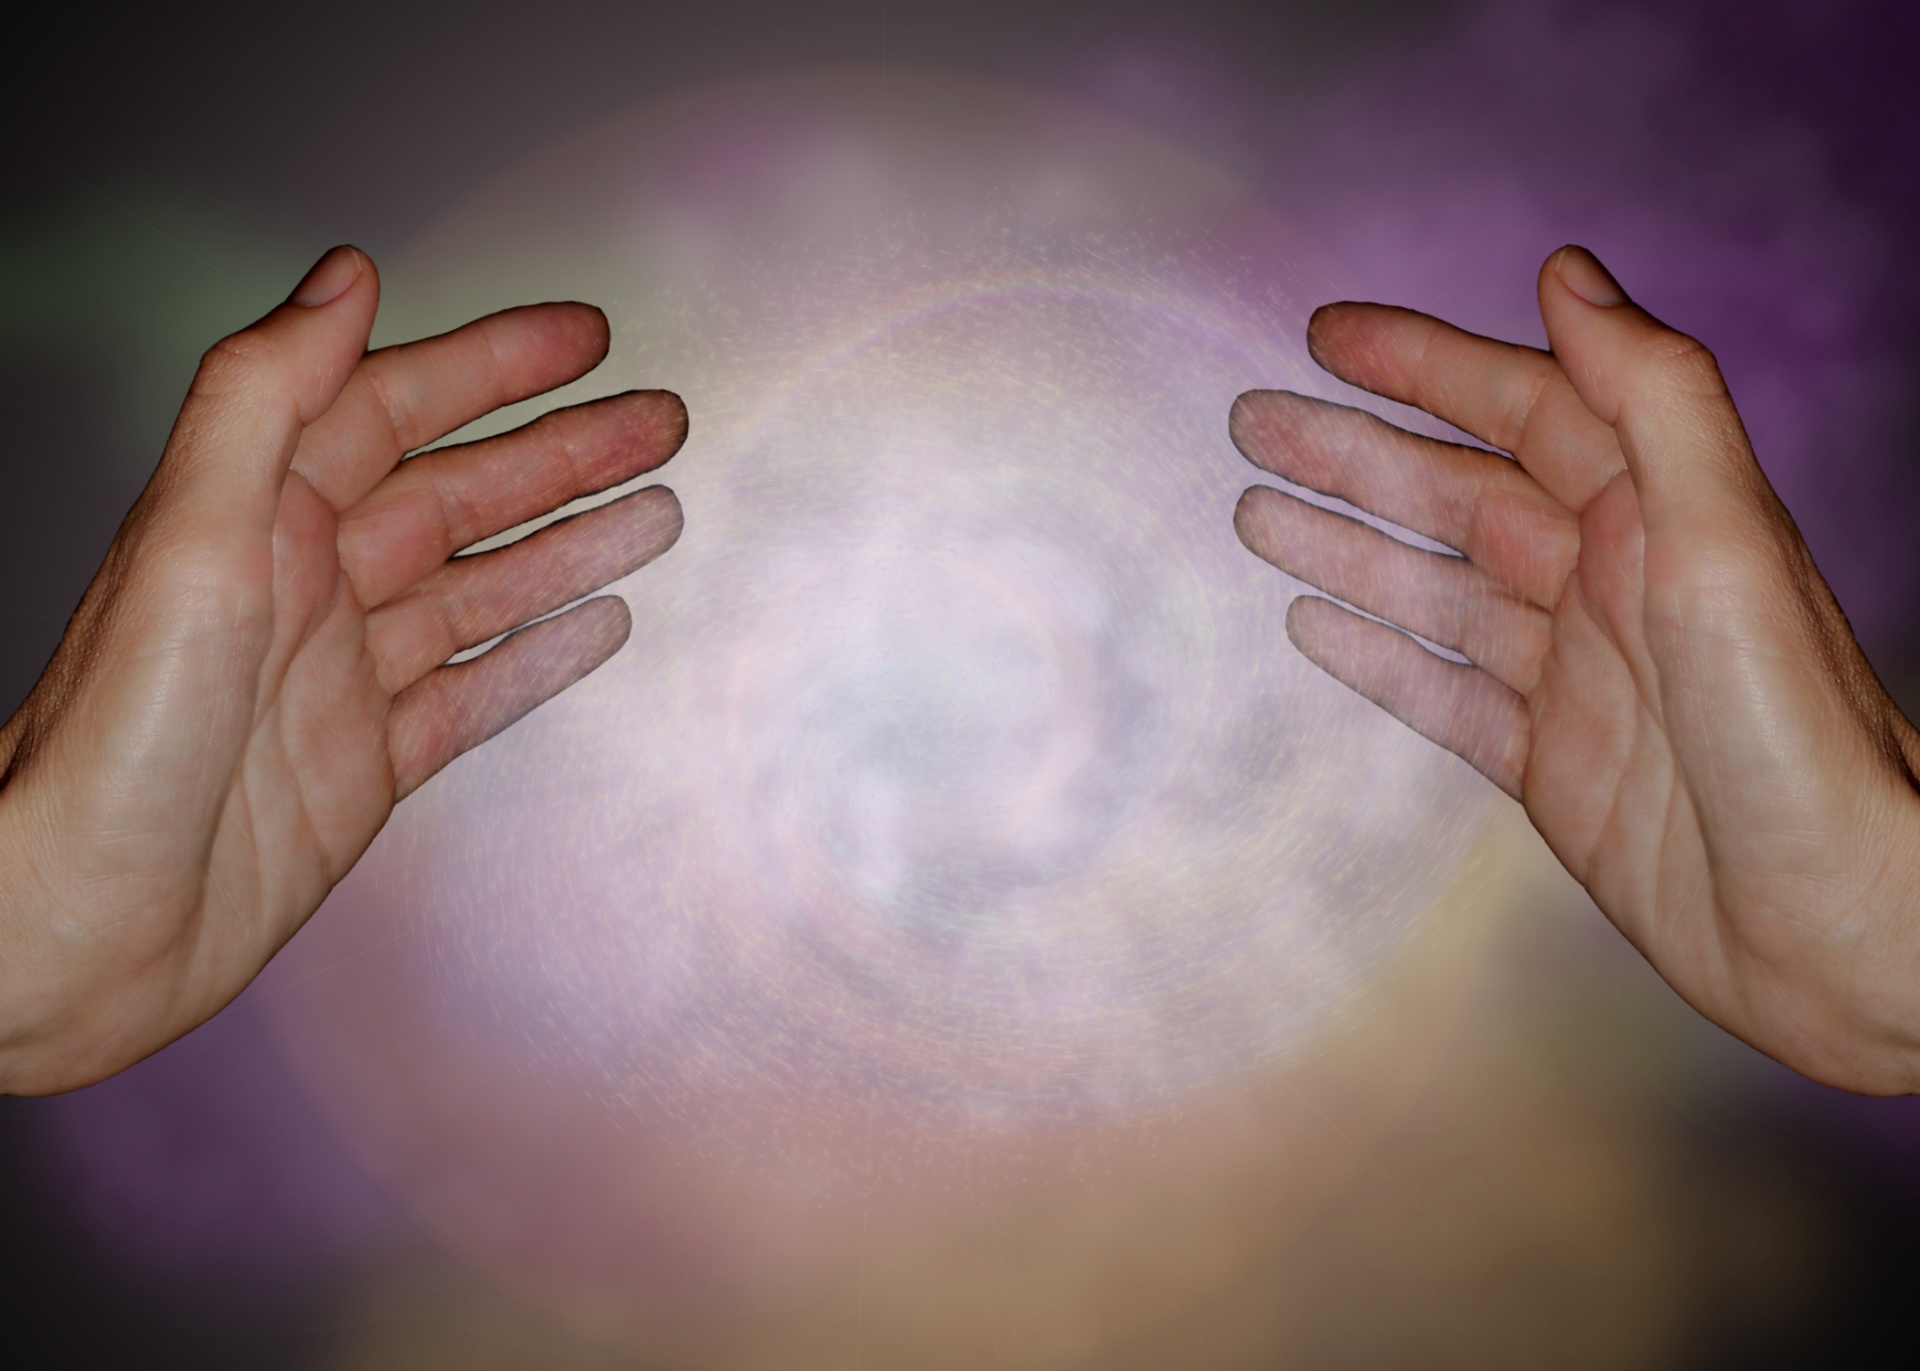 Reiki Energy: The Healing Touch